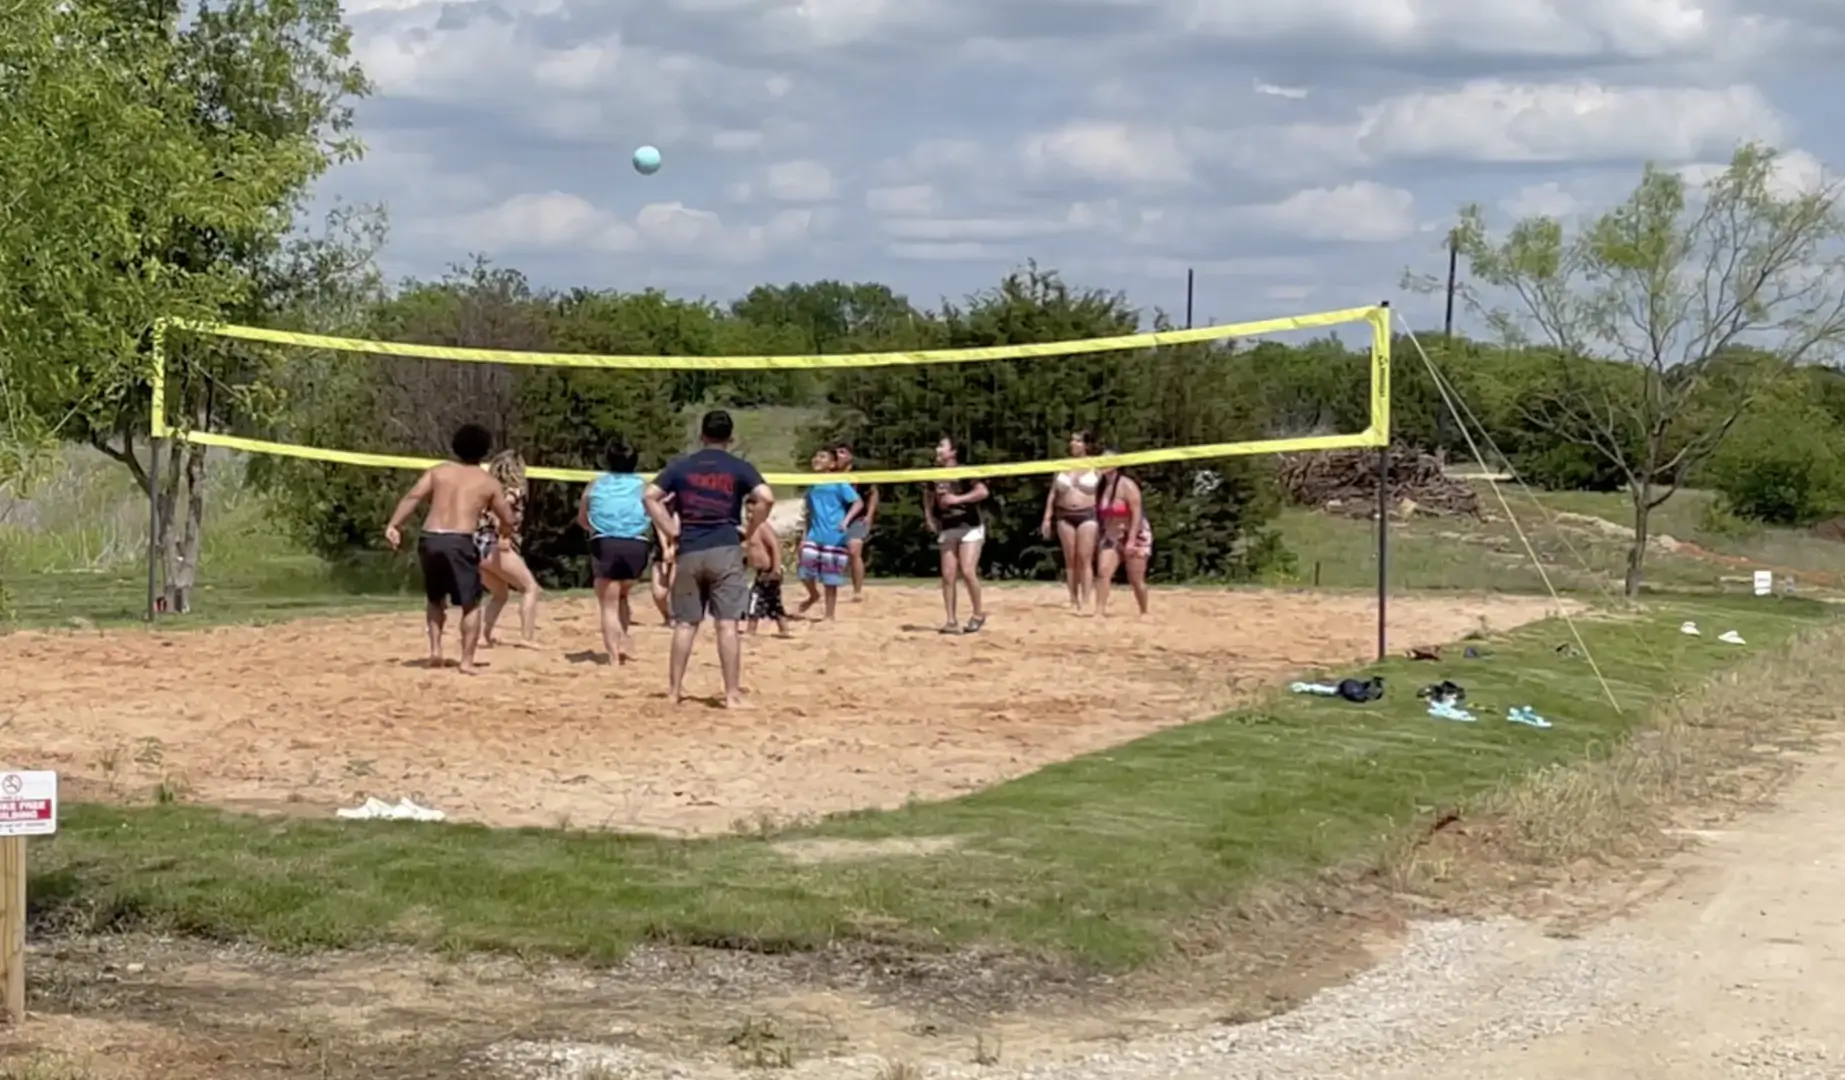 Kids playing volley ball in the outdoor